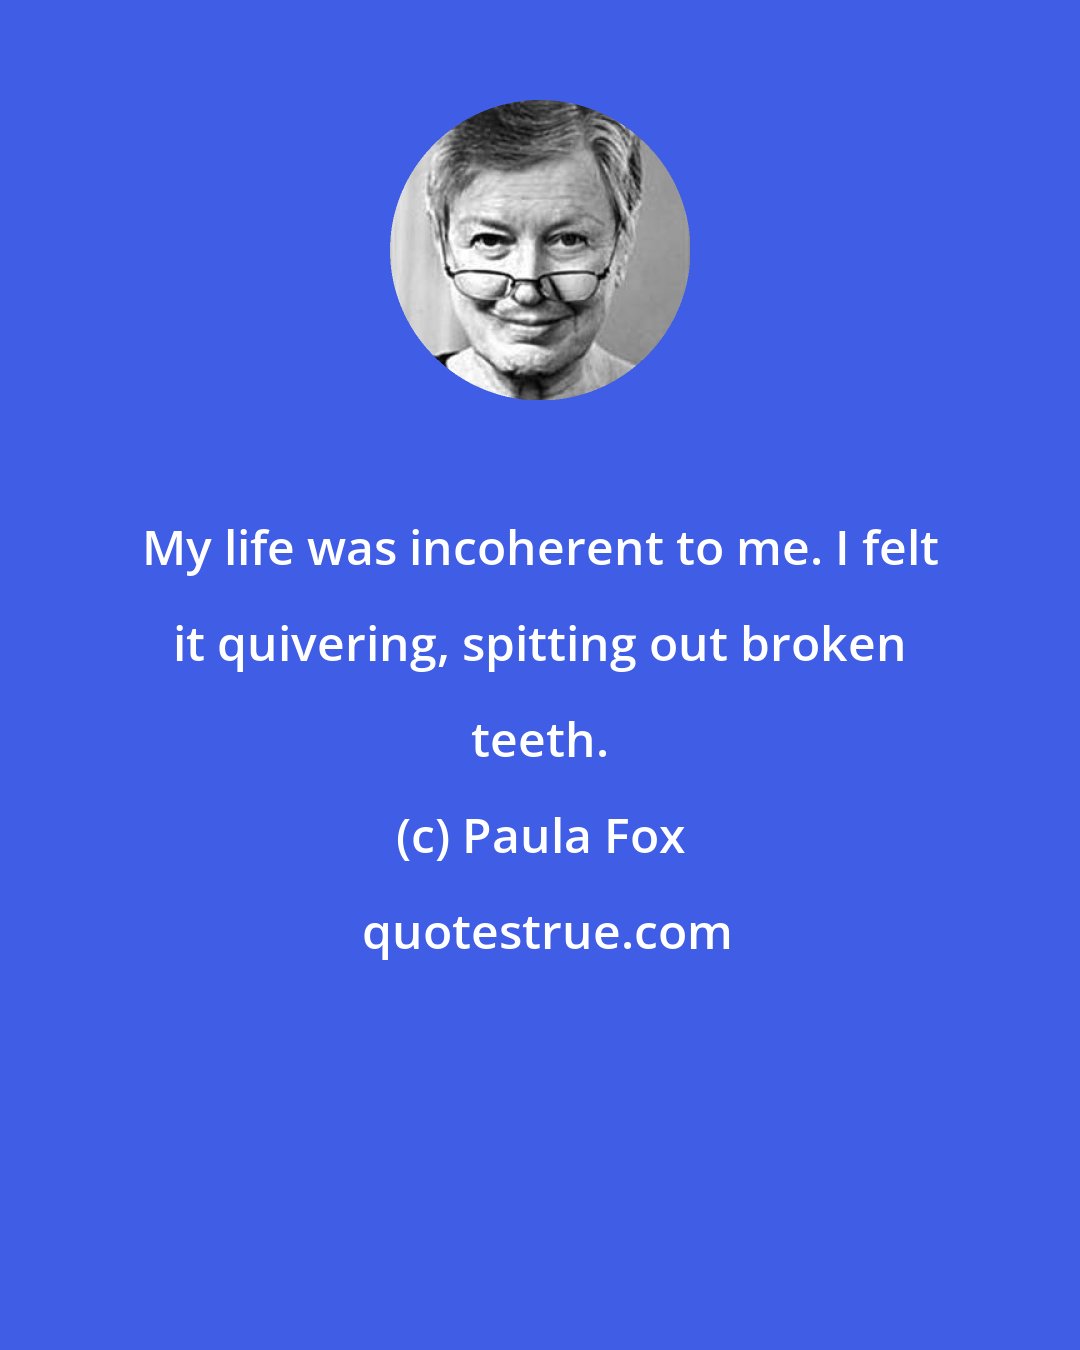 Paula Fox: My life was incoherent to me. I felt it quivering, spitting out broken teeth.